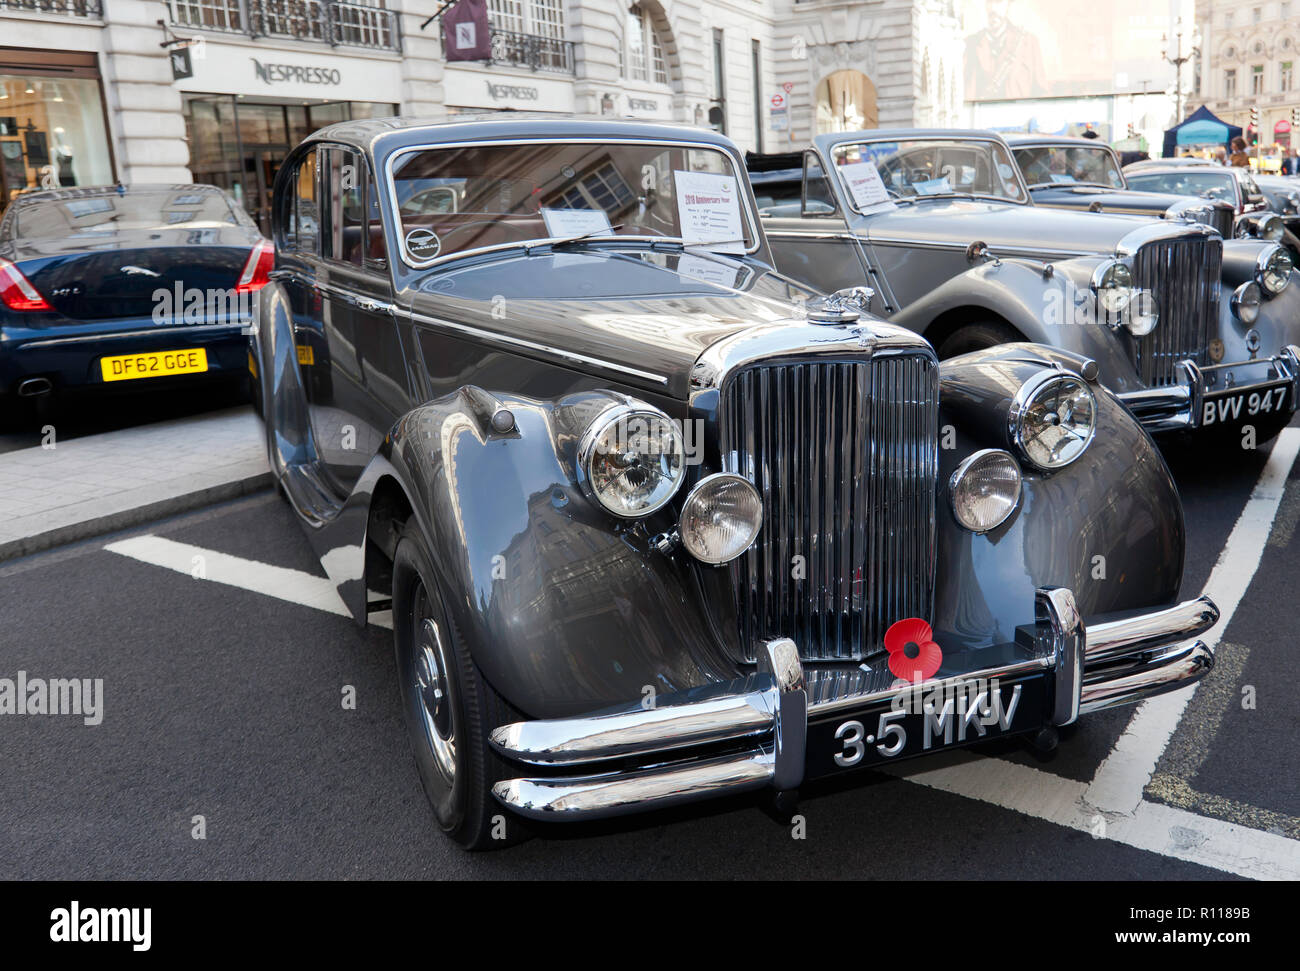 Three-quarter front view of a 1950 Jaguar Mark V Saloon, on display at the Regents Street Motor Show 2018 Stock Photo